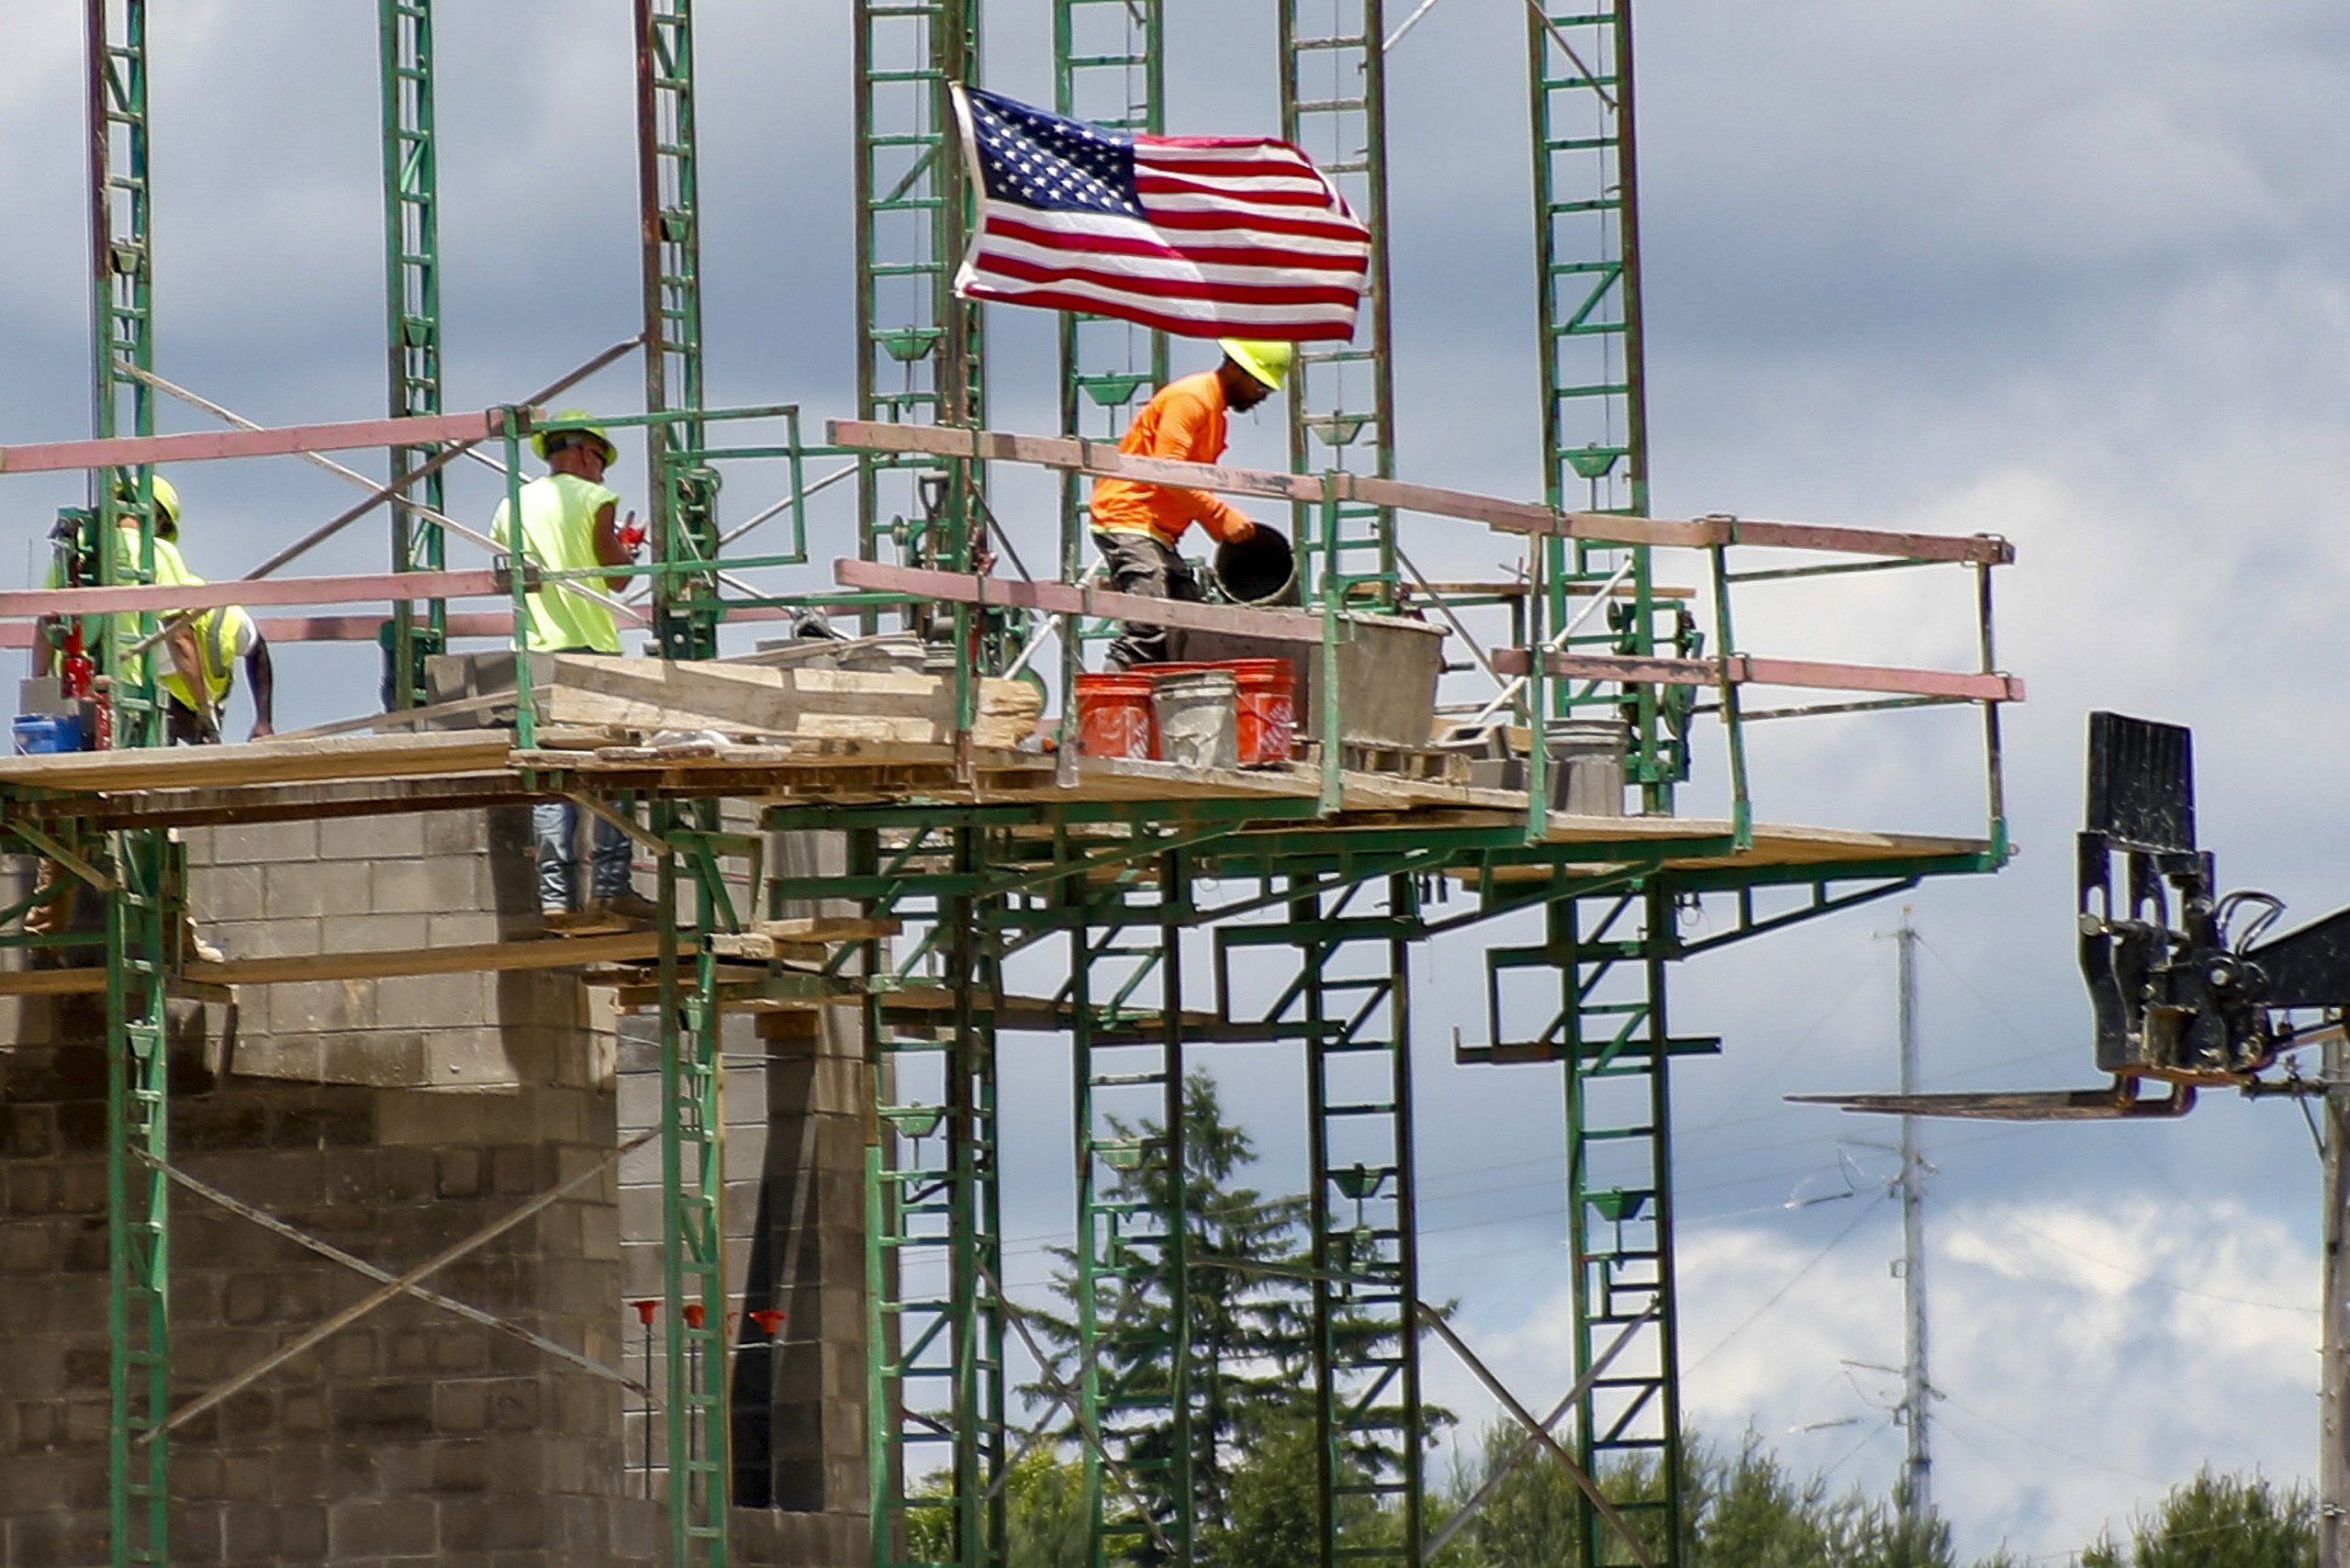 FILE - In this June 11, 2020, file photo workers on scaffolding lay blocks on one of the larger buildings at a development site where various residential units and commercial sites are under construction in Cranberry Township, Butler County, Pa. Eighty-five percent of Democrats call economic conditions “poor,” while 65% of Republicans describe them as “good,” according to a new survey by The Associated Press-NORC Center for Public Affairs Research. (AP Photo/Keith Srakocic, File)